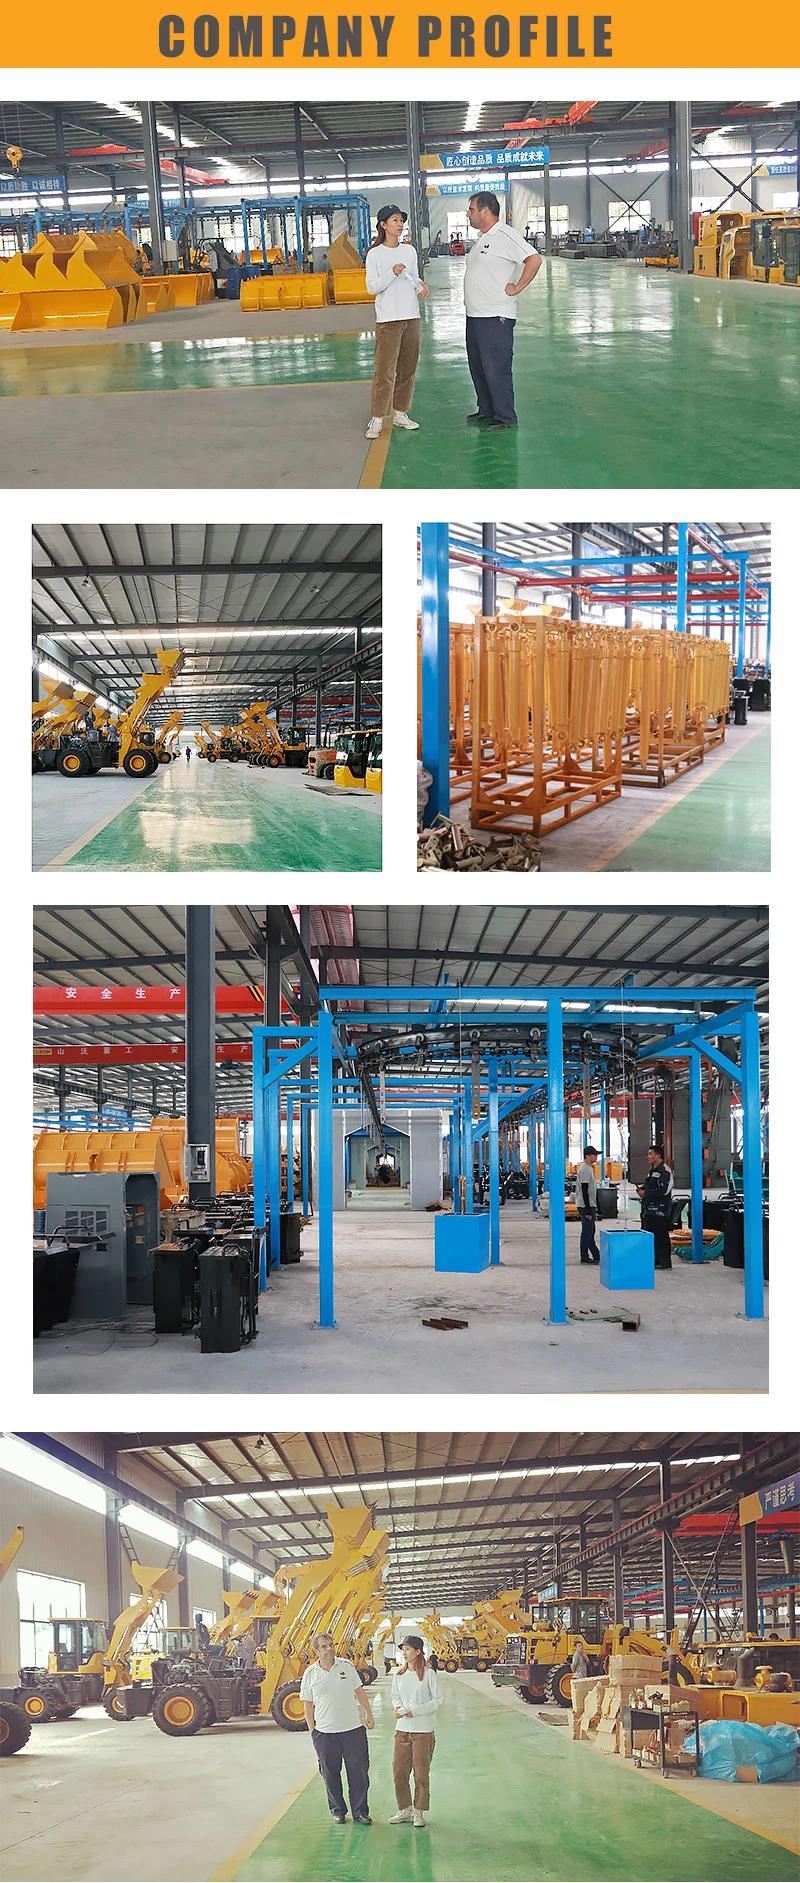 CE ISO SGS OEM China Manufacture Abbasist Agricultural Machine Sugar Cane Loader with Grab